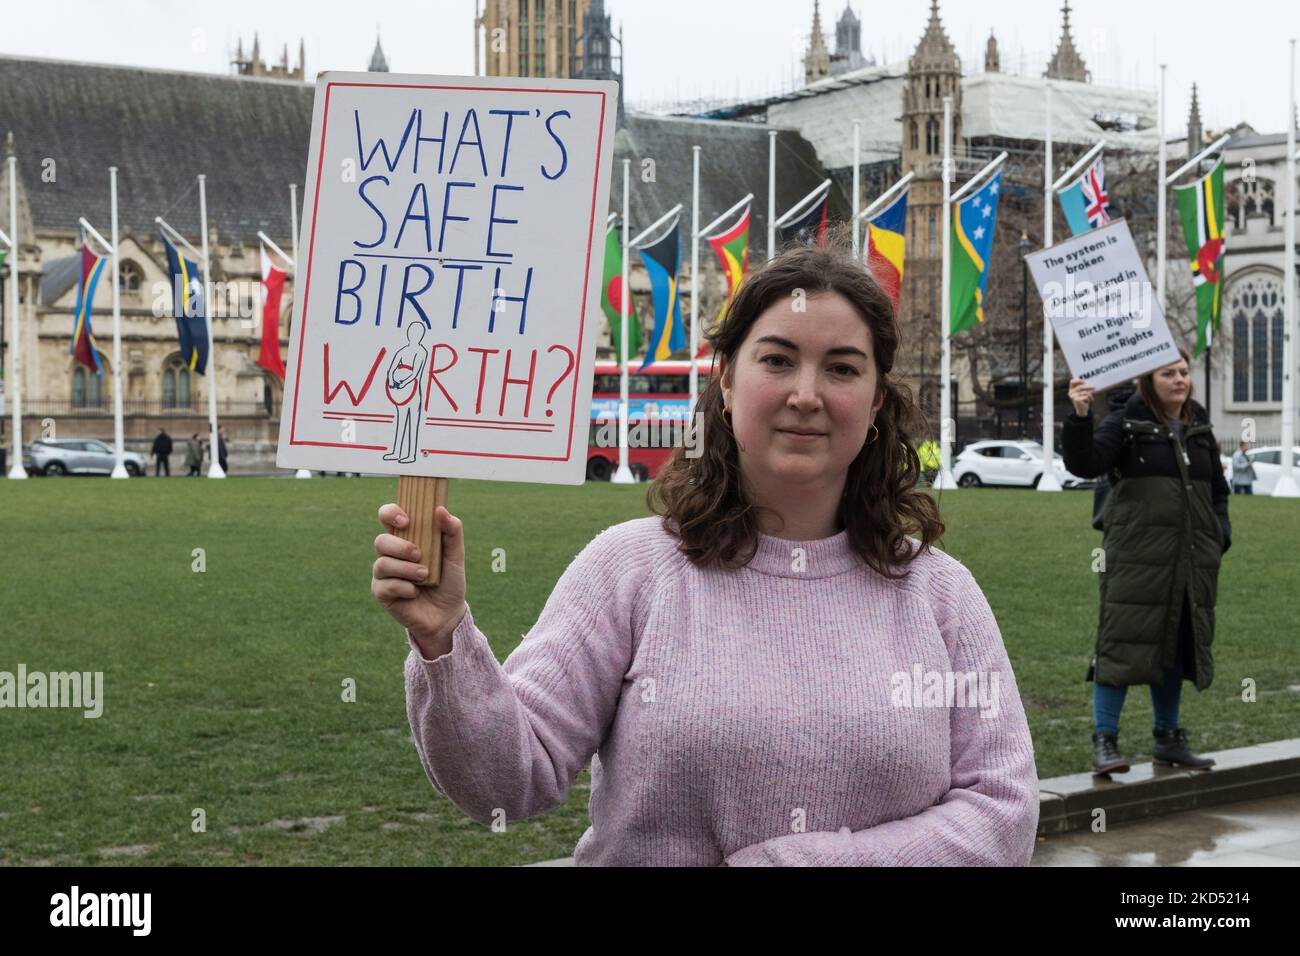 LONDON, UNITED KINGDOM - MARCH 13, 2022: A woman holds a placard as midwives, doulas, and birth workers demonstrate in Parliament Square calling on the government to act urgently in response to increased pressures on the maternity services including staff shortages and underfunding on March 13, 2022 in London, England. (Photo by WIktor Szymanowicz/NurPhoto) Stock Photo